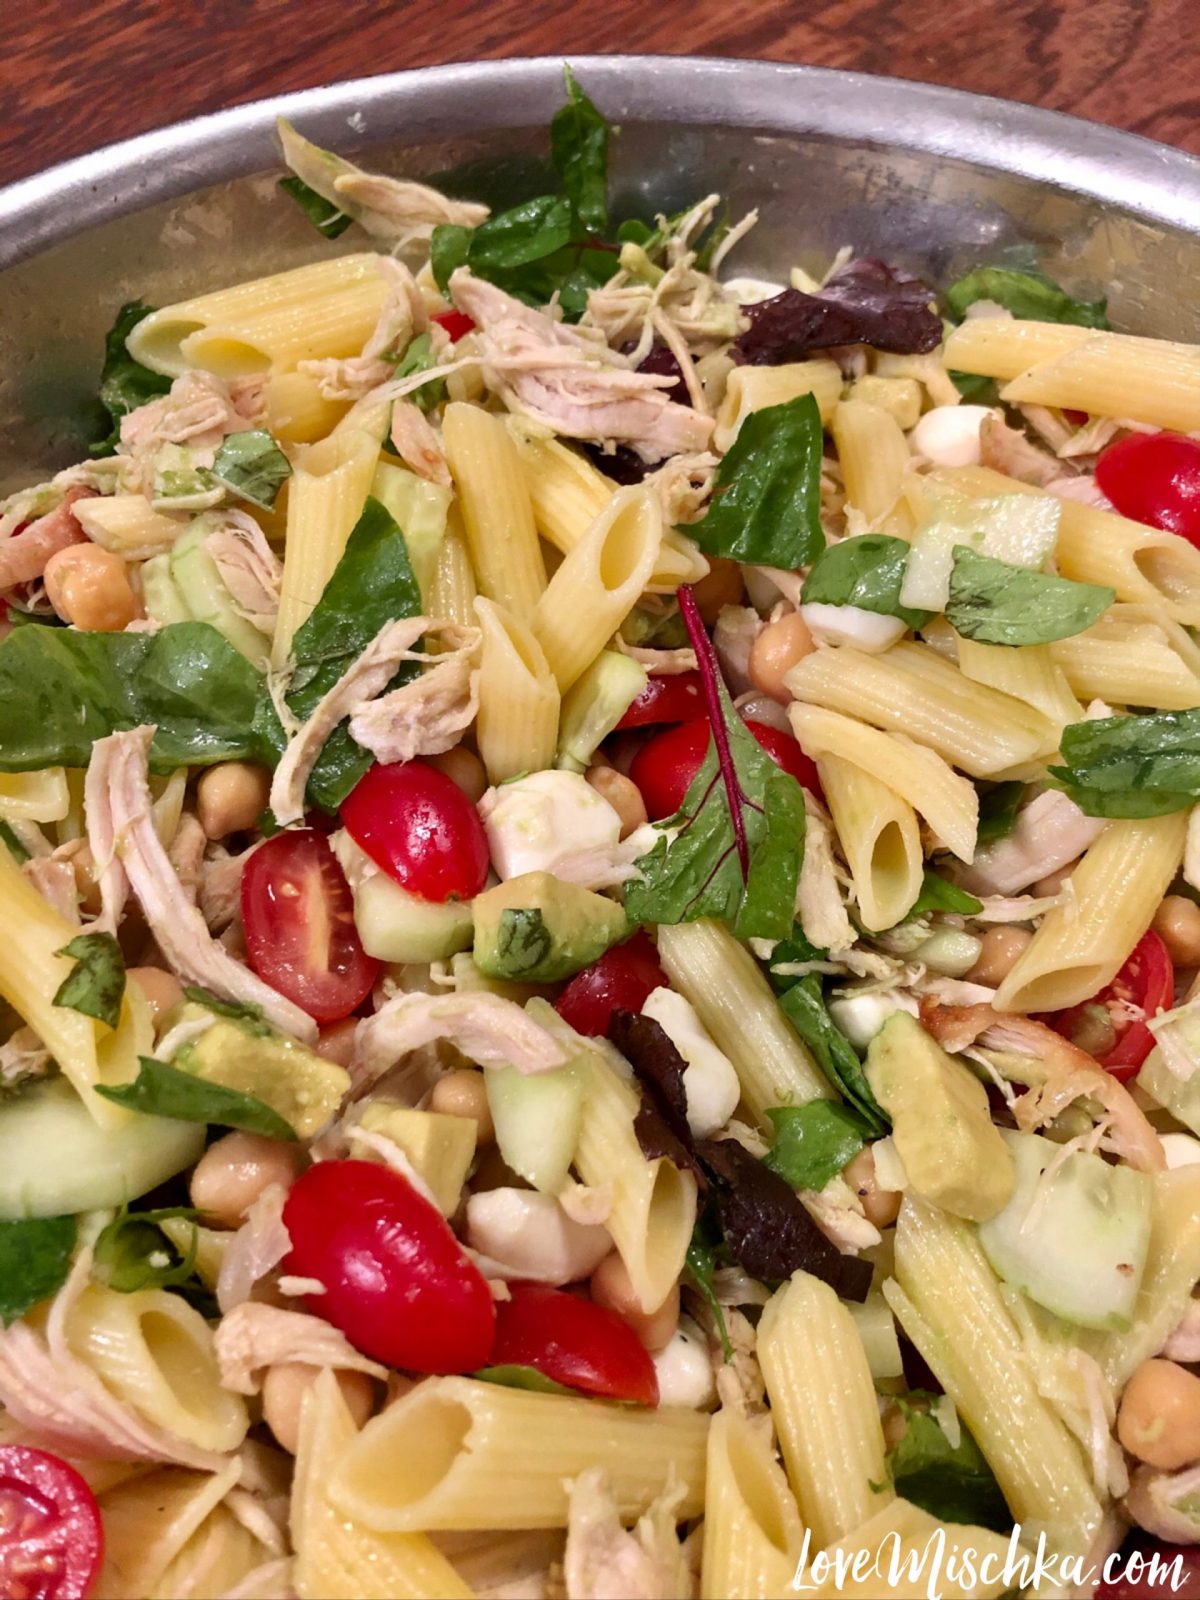 A close up of high protein pasta salad with vegetables